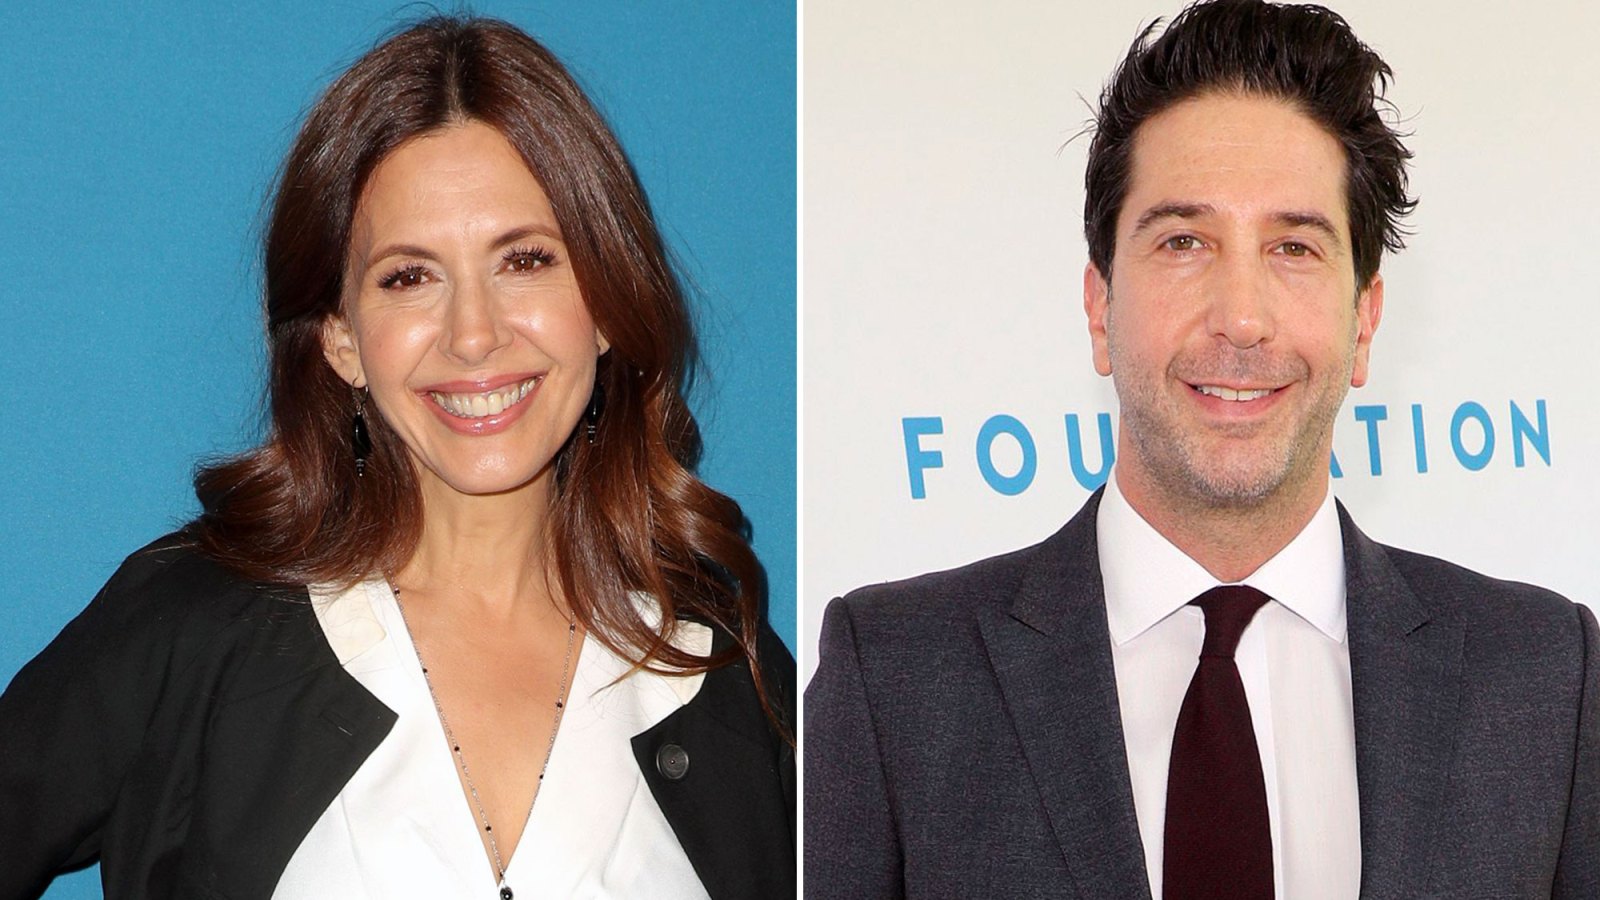 ‘Friends’ Alum Jessica Hecht Weighs In on David Schwimmer’s Diversity Comments